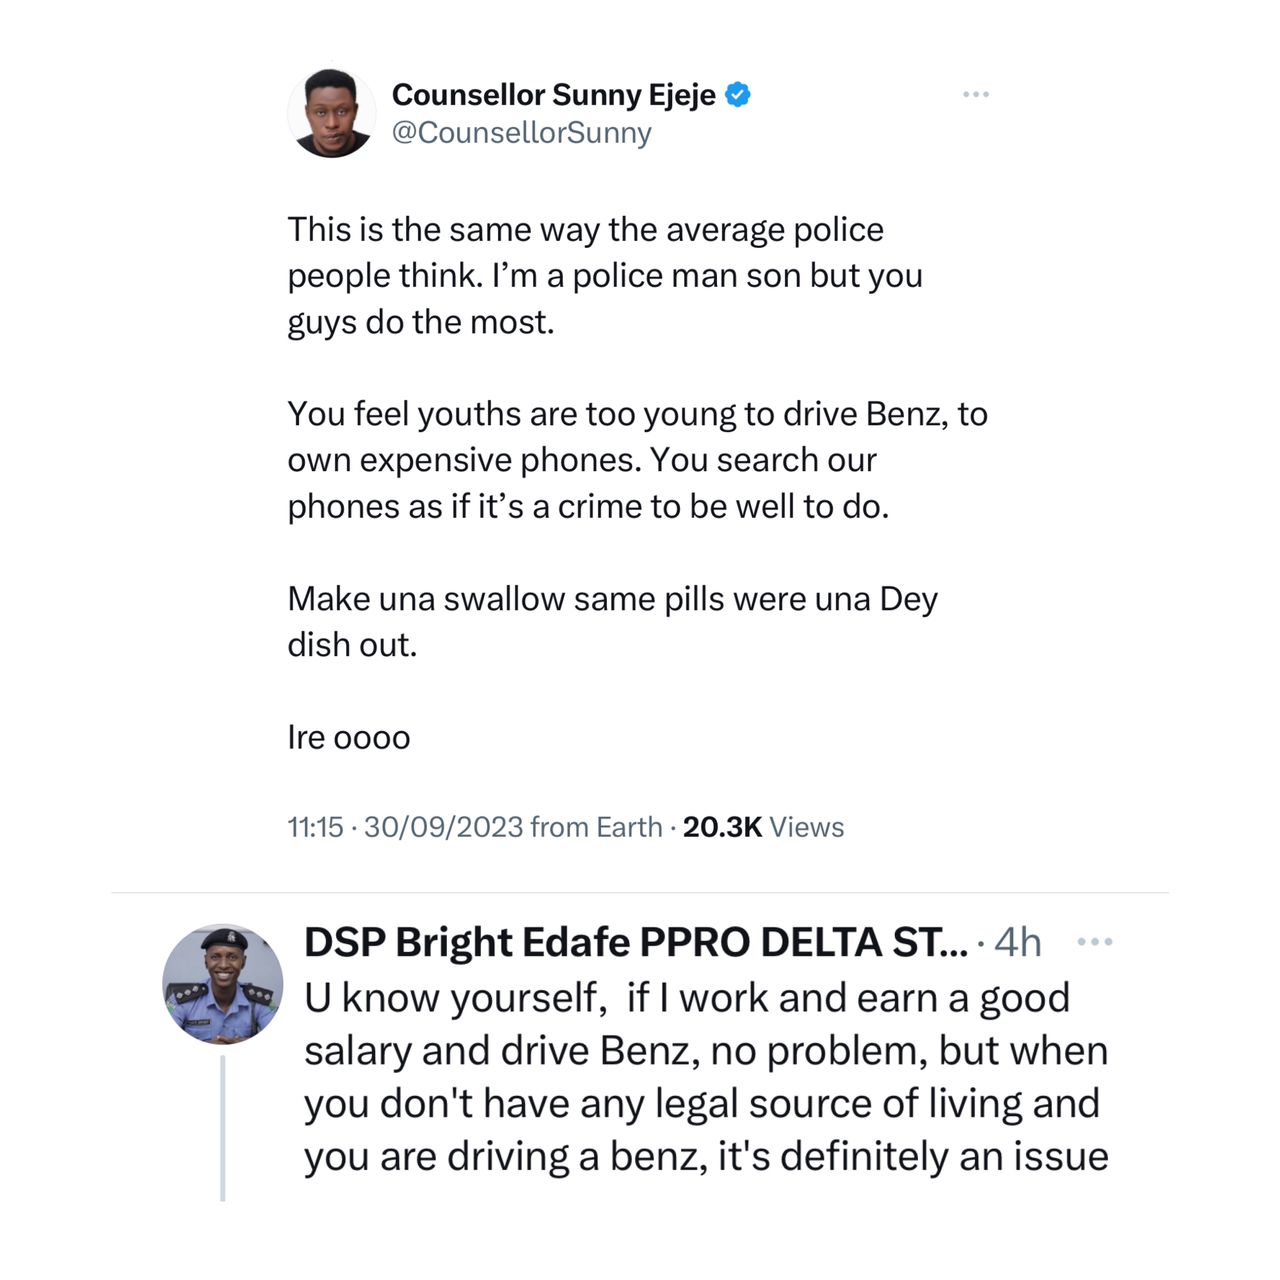 Delta PRO replies Nigerian man questioning a Female police officer for possessing an expensive phone